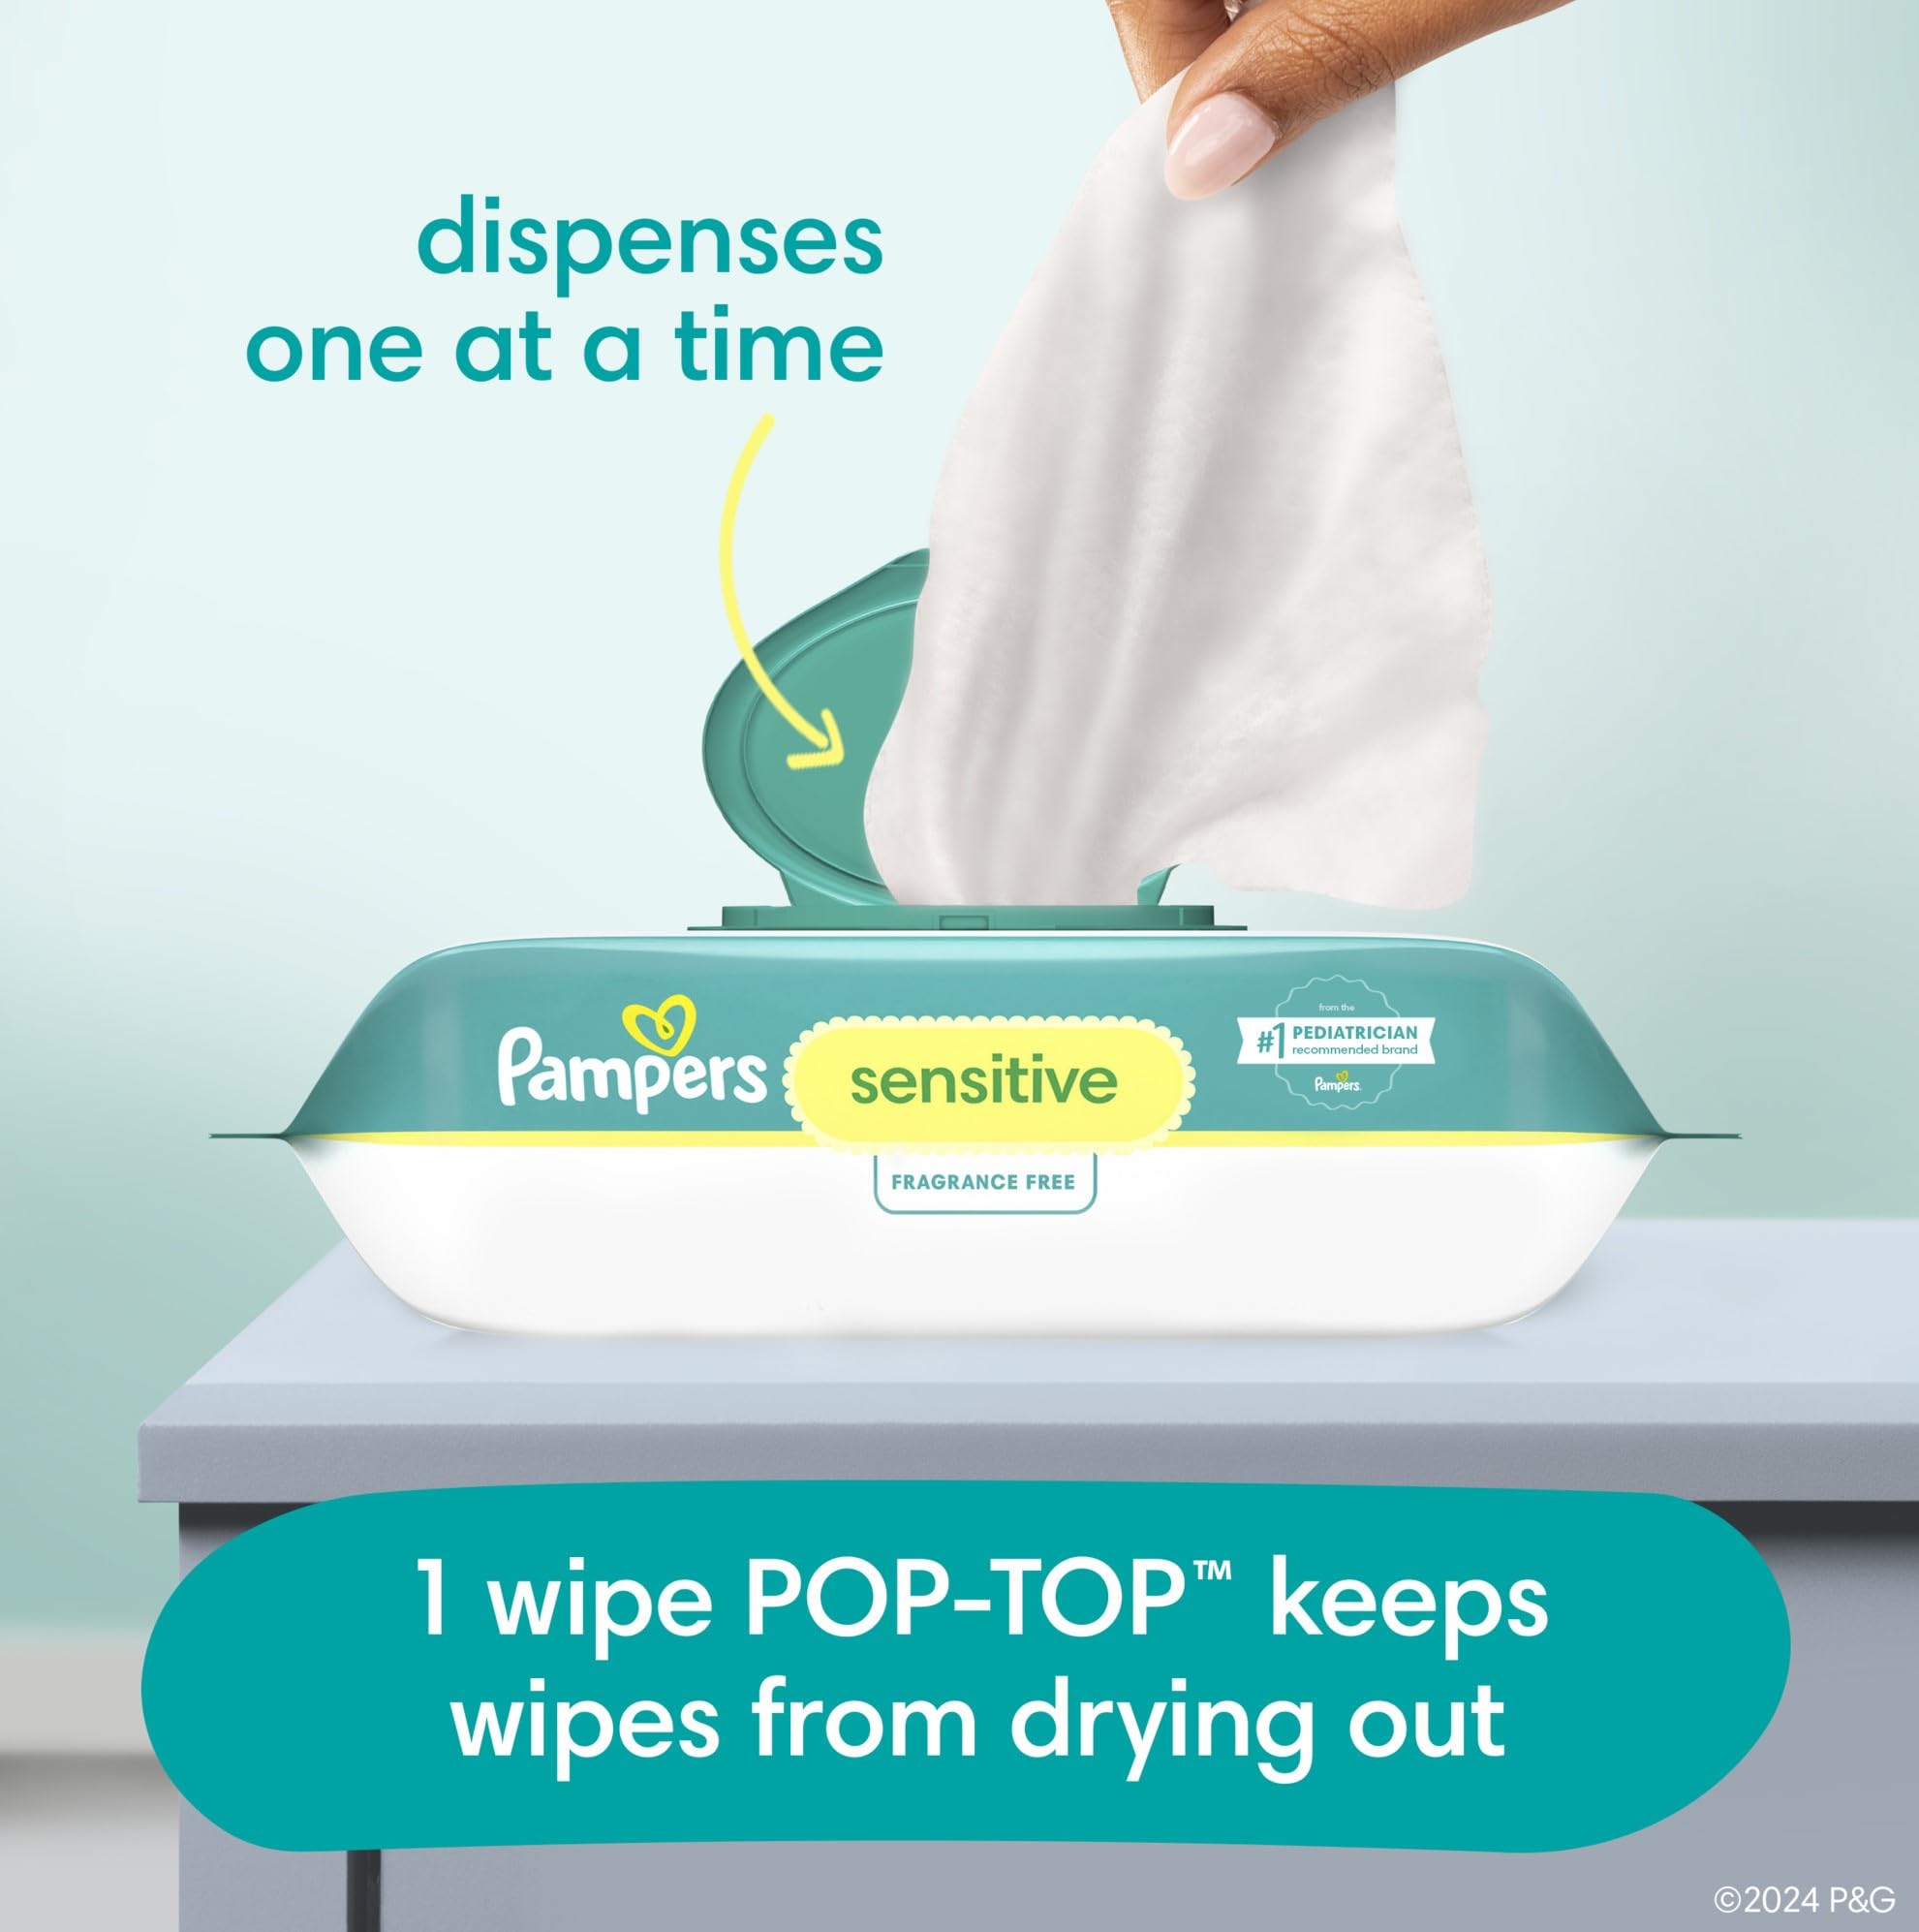 Pampers Sensitive Baby Wipes, Water Based, Hypoallergenic and Unscented, 16 Flip-Top Packs (1344 Wipes Total)